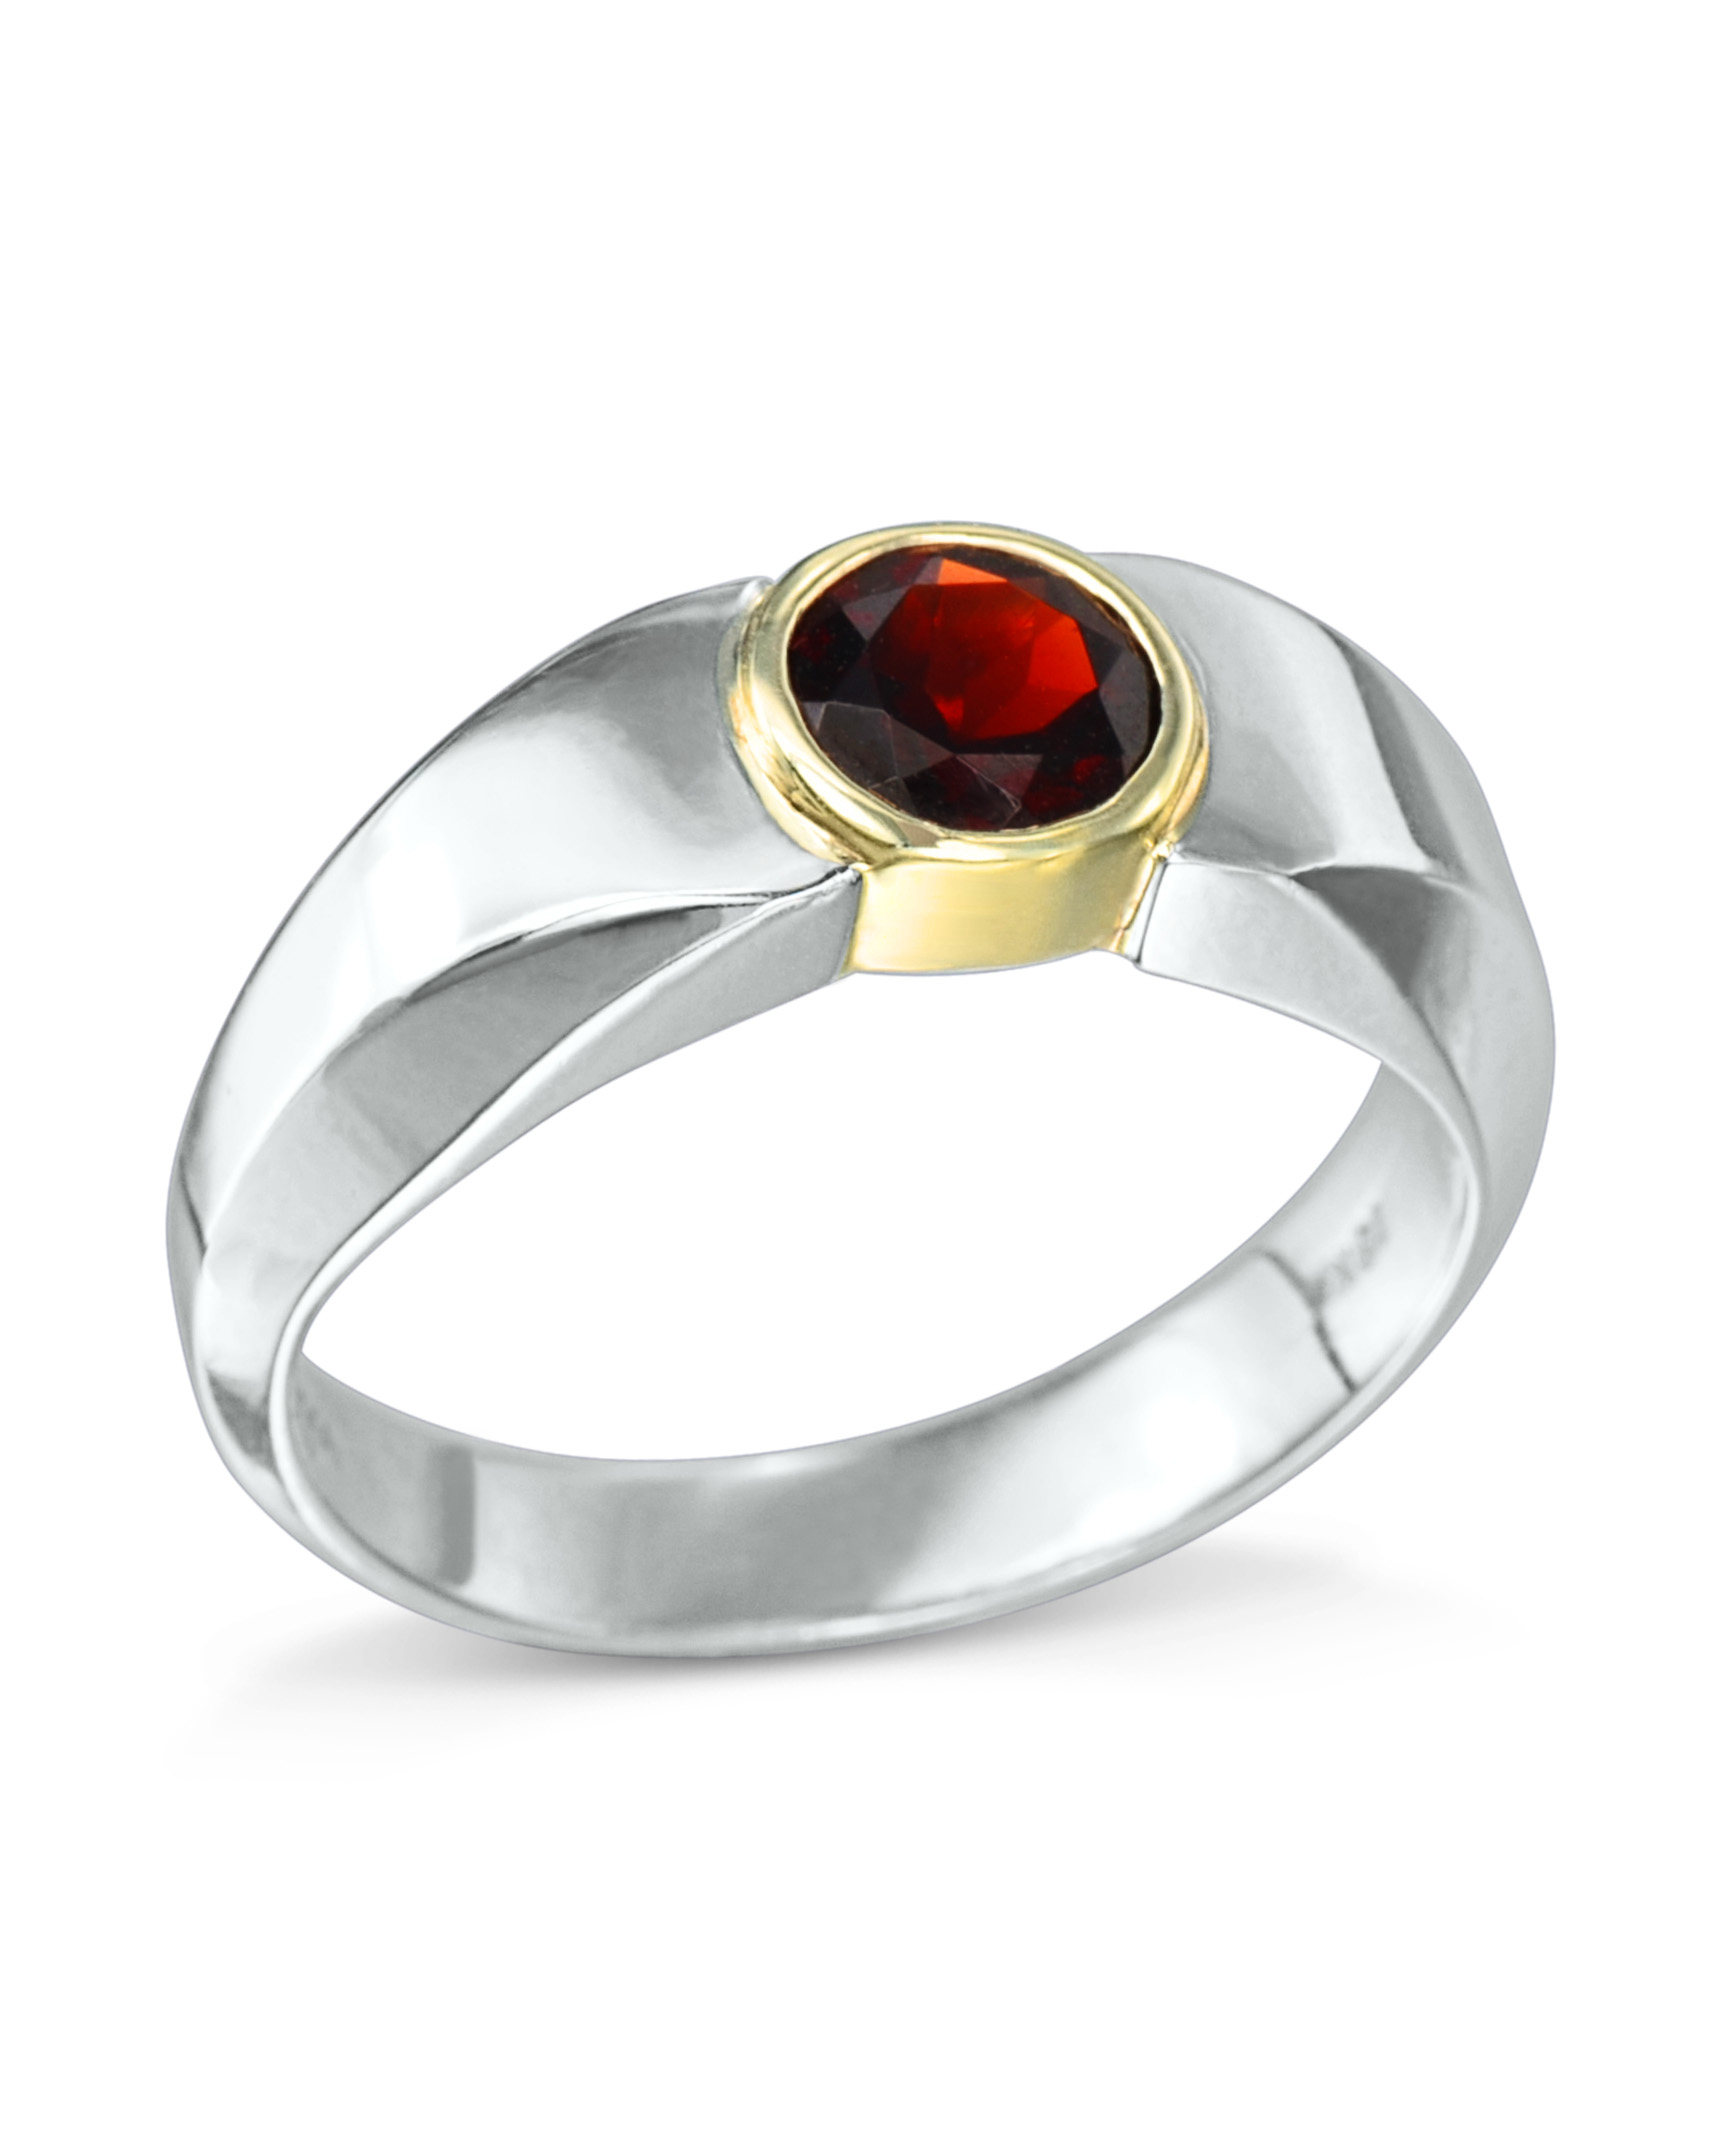 Handcrafted Simple Designer Garnet Gemstone 925 Sterling Silver Gold Plated Ring  Jewelry